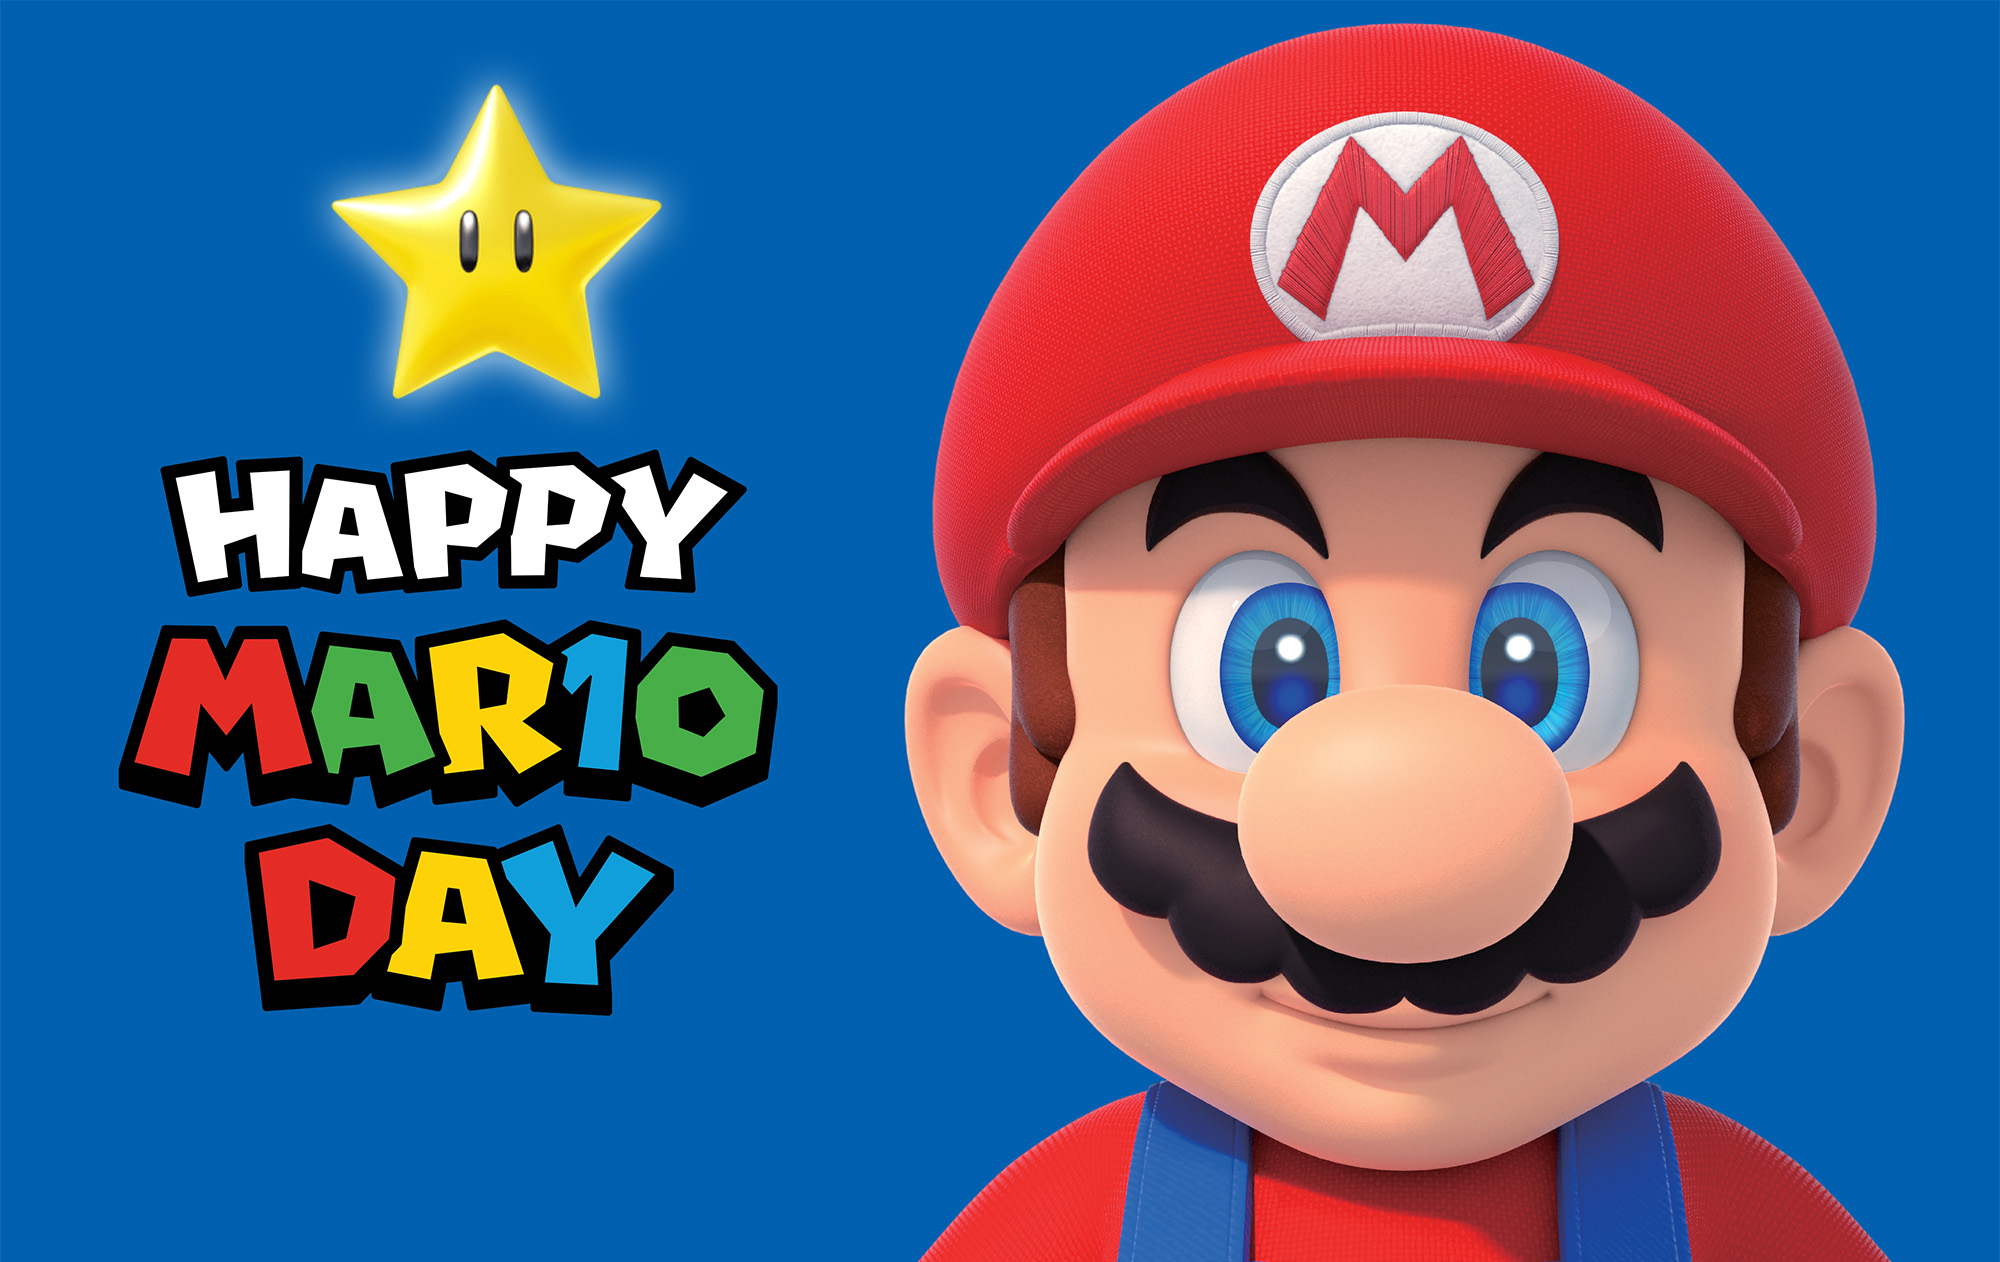 It's Mar10 Day Celebrating Mario Day with Gaming Themed Car Gear and